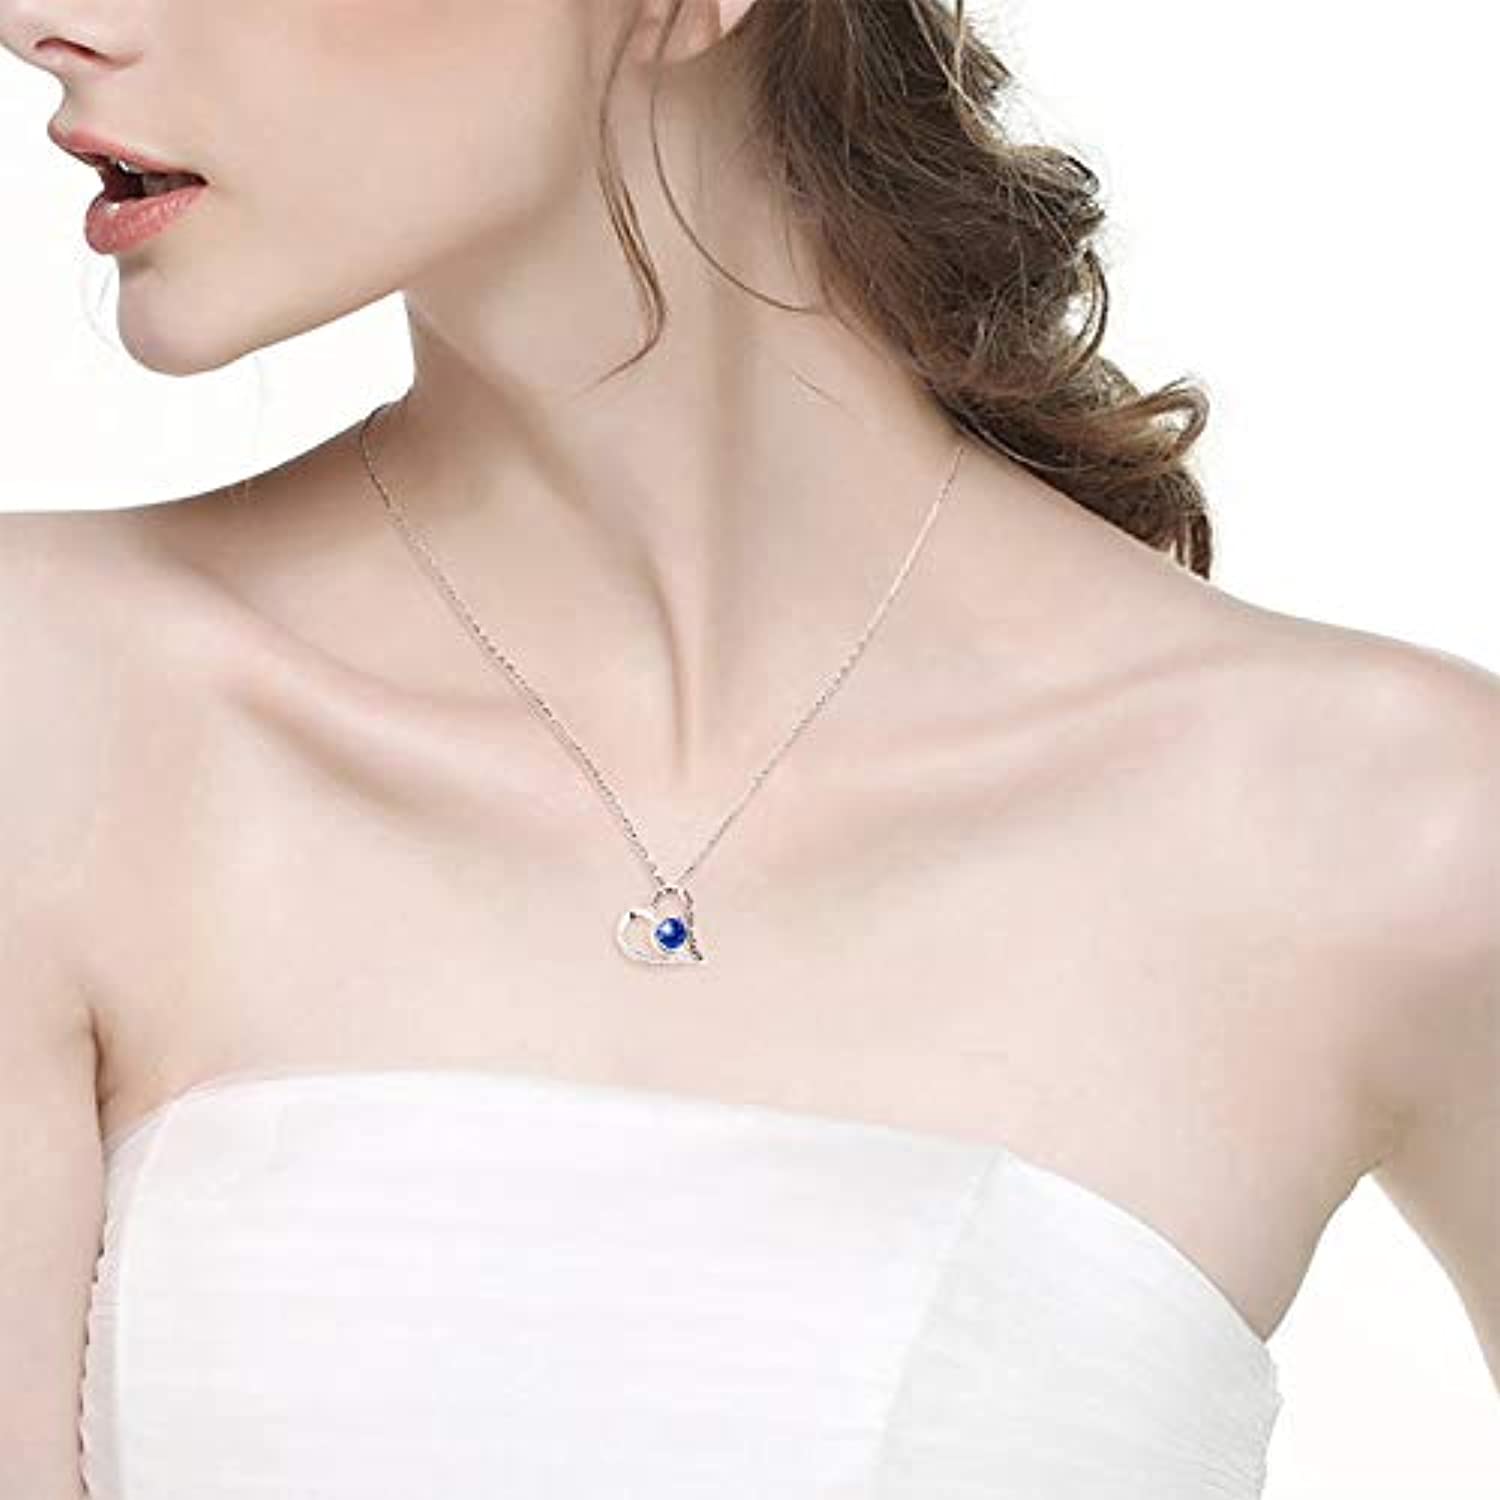 Blue Sapphire September Birthstone Necklace for Women Birthday Gifts for Wife Mom Sterling Silver Love Heart Jewelry